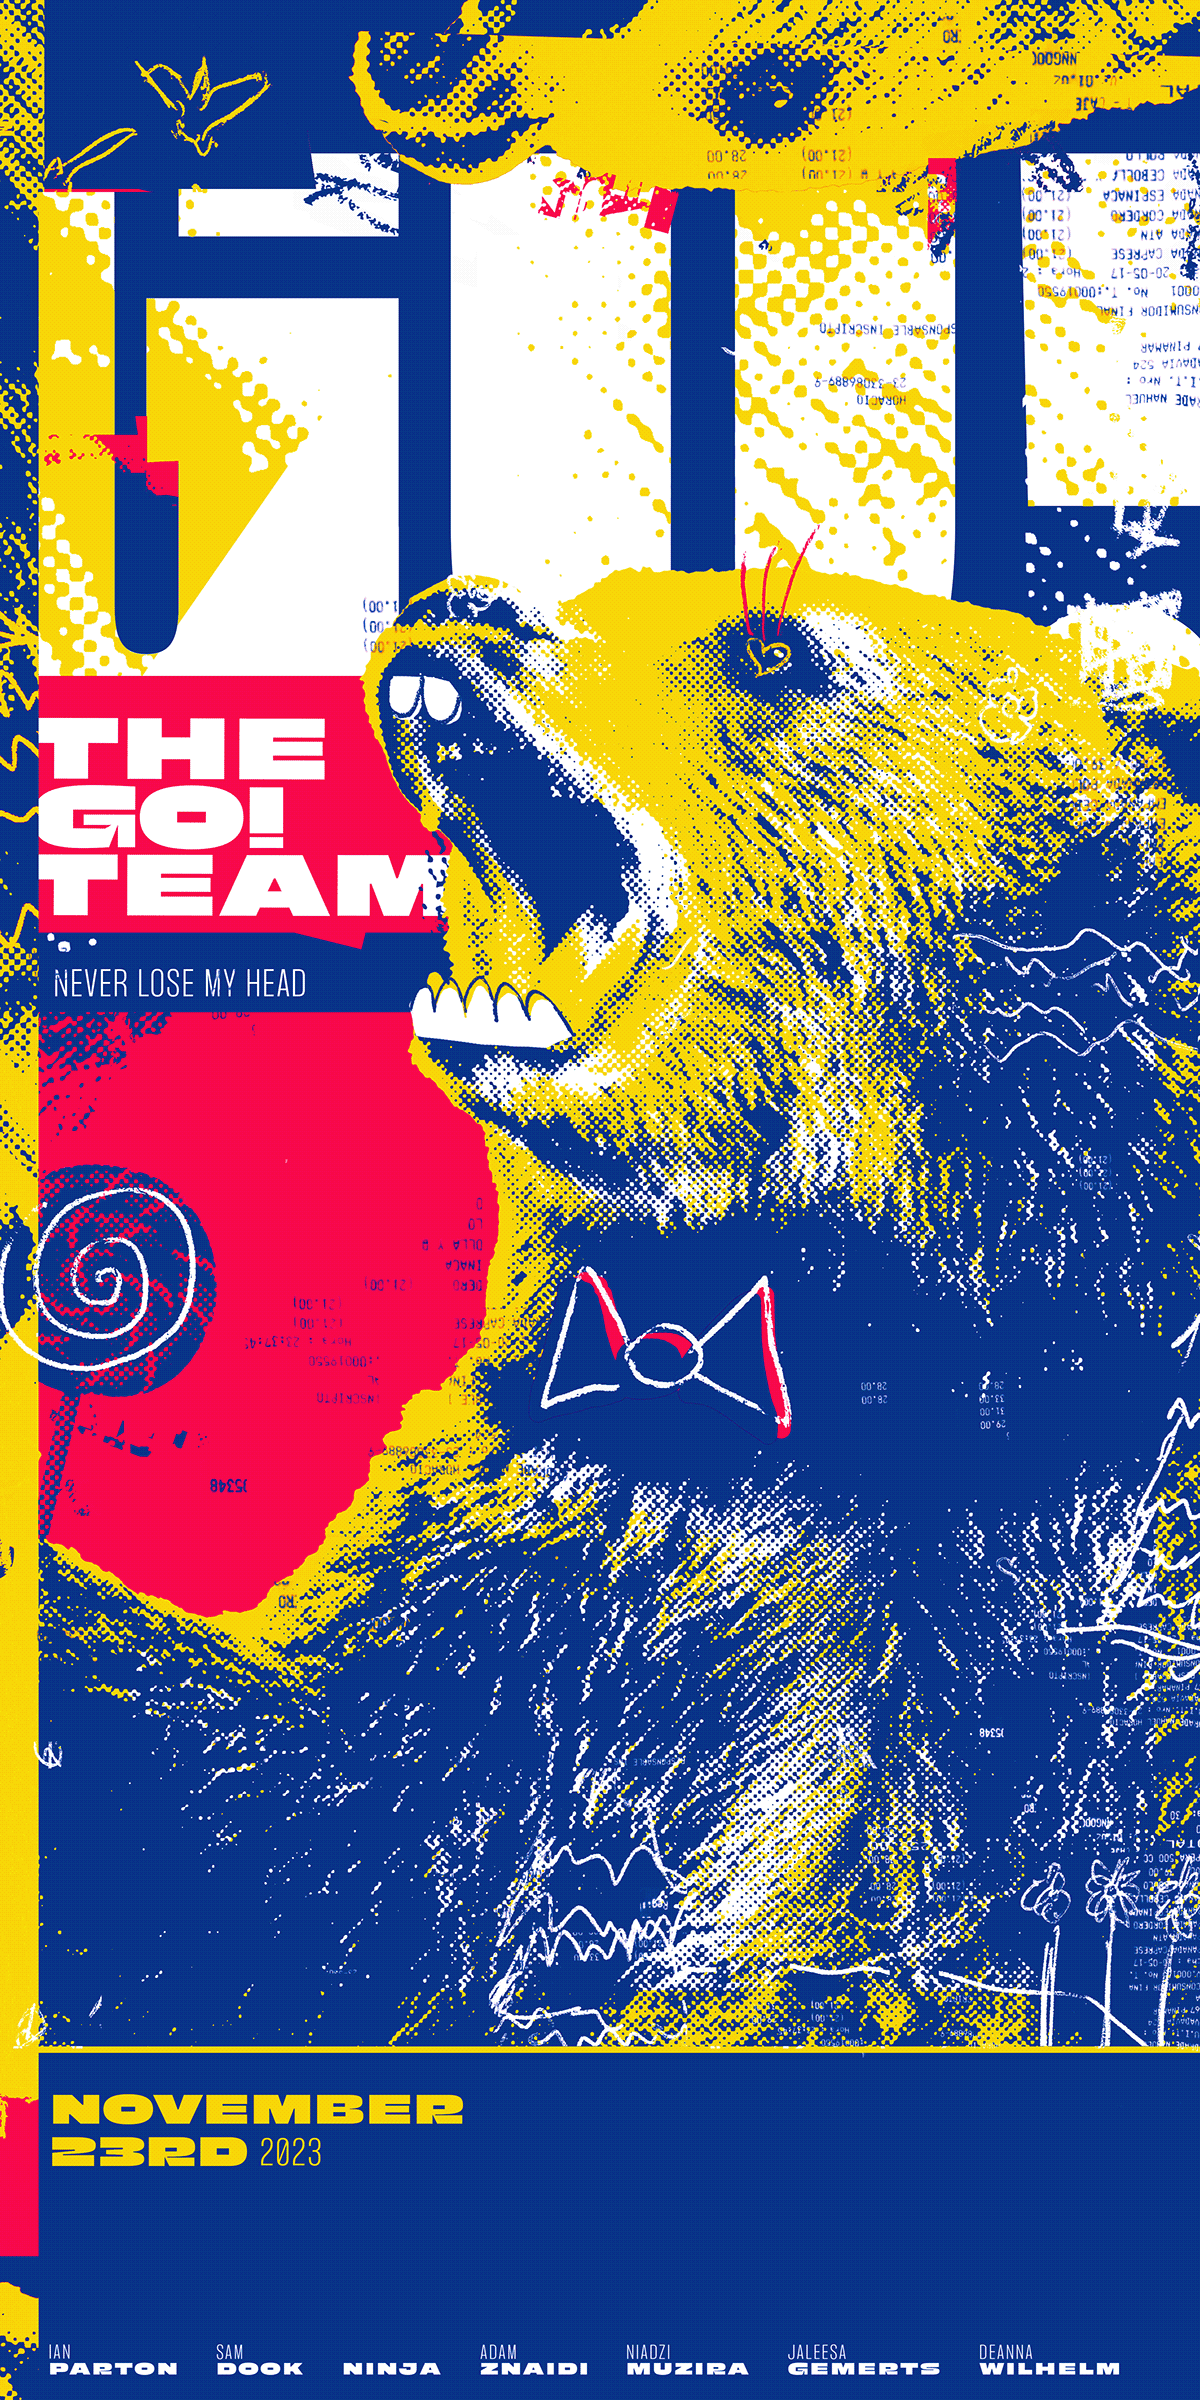 Poster design for The Go! Team displaying a bear yelling with doodles on it.